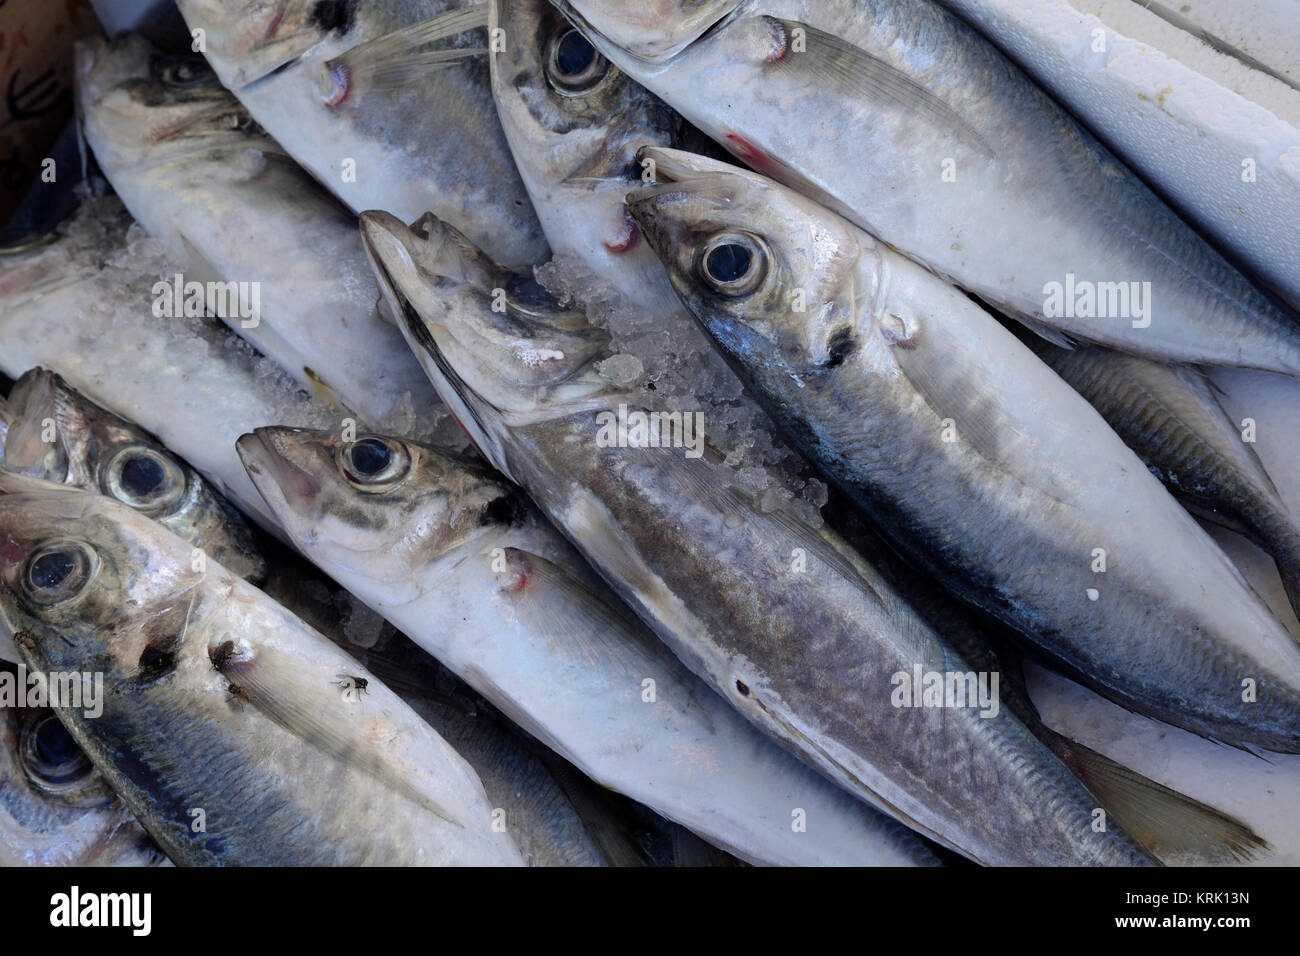 Fischwirtschaft High Resolution Stock Photography and Images - Alamy